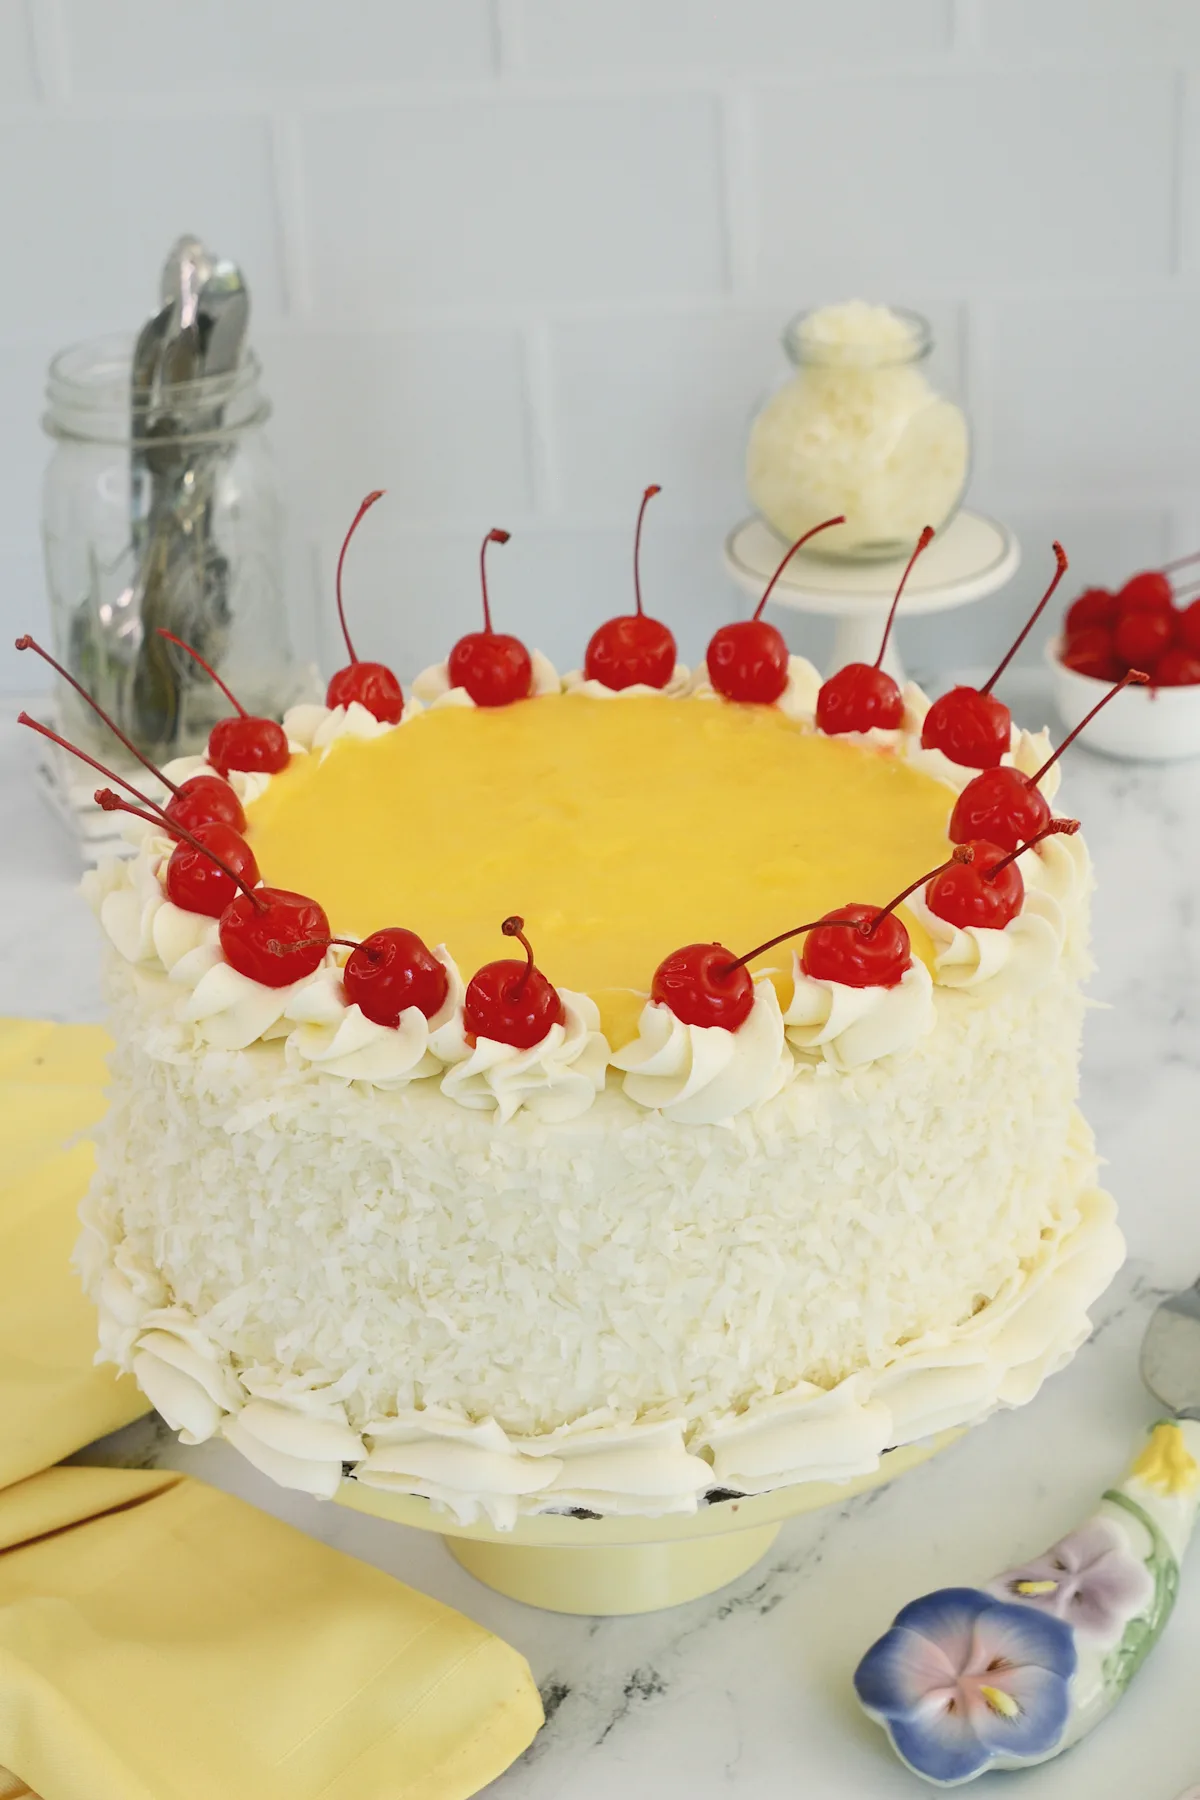 Pina Colada Cake (Dairy-Free) - Caked by Katie